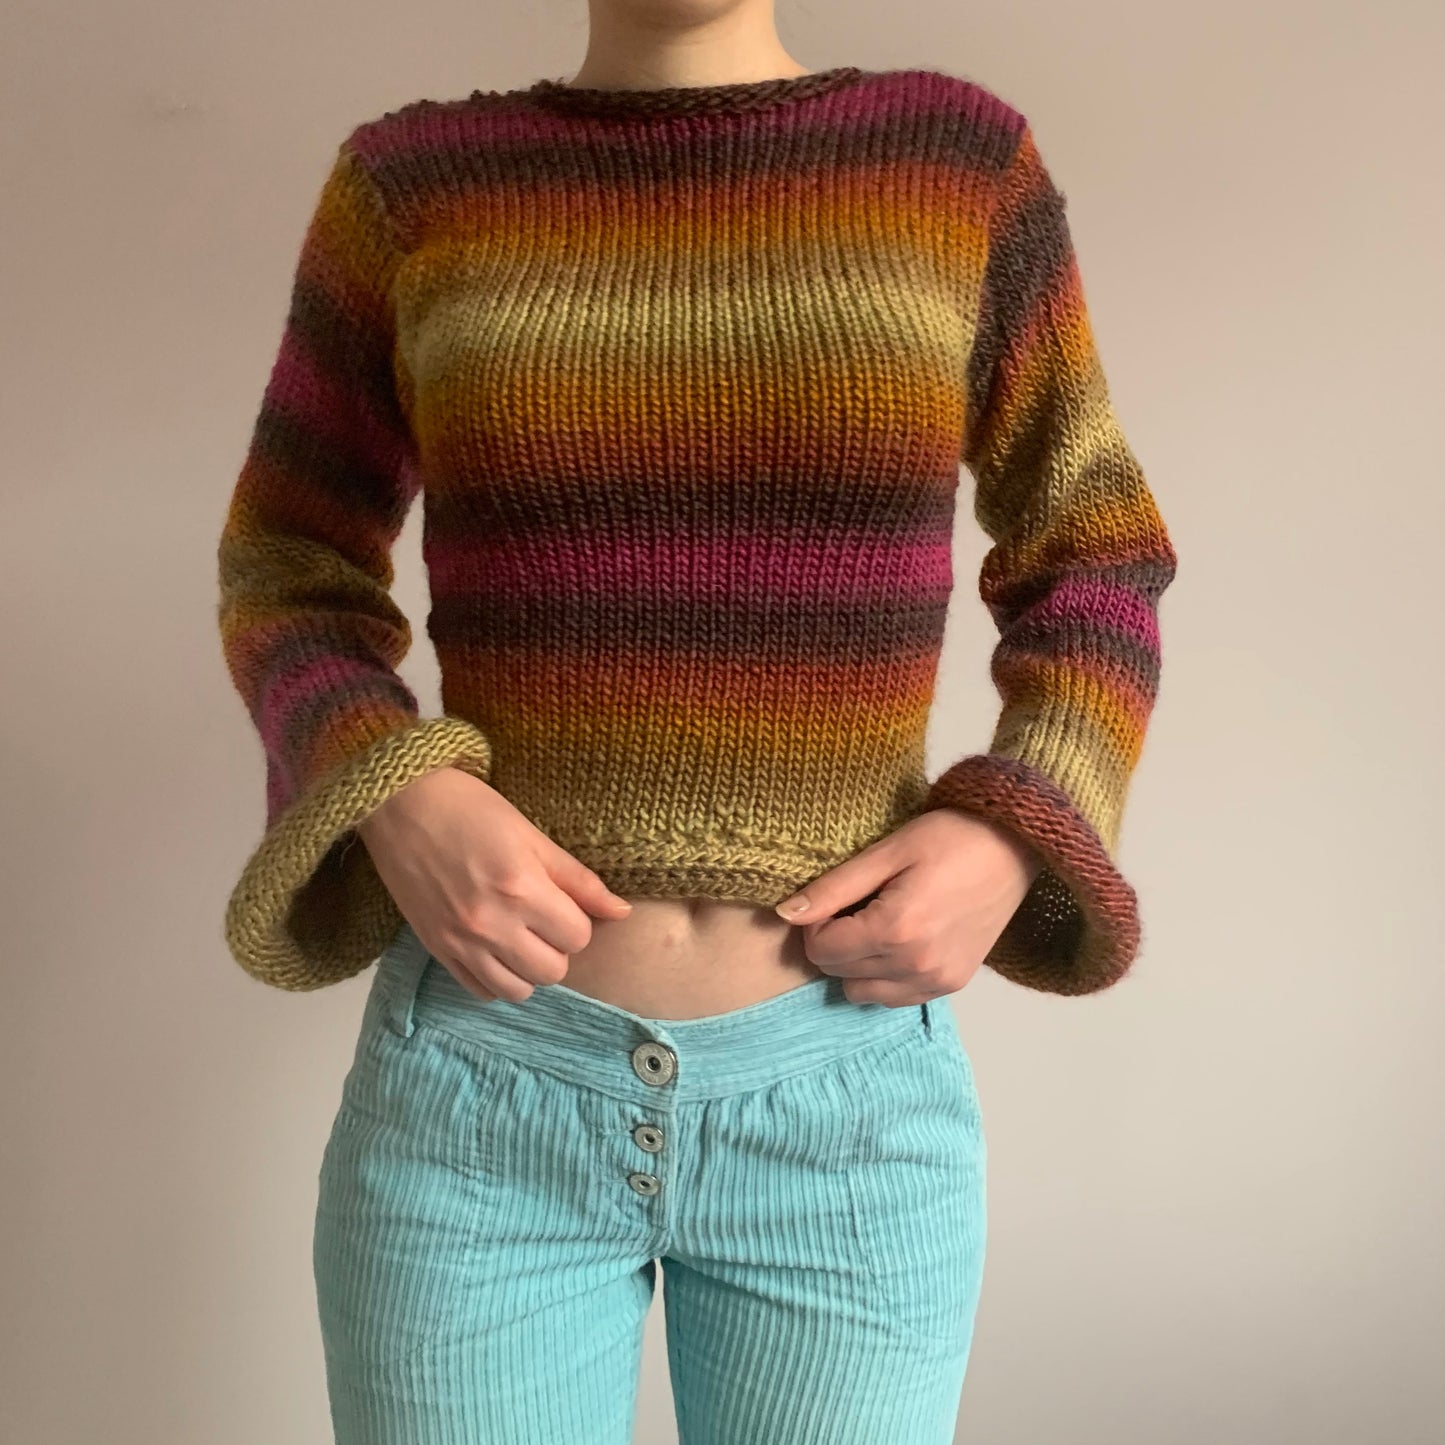 The Sunset Shades Sweater - handmade knitted flared sleeve jumper